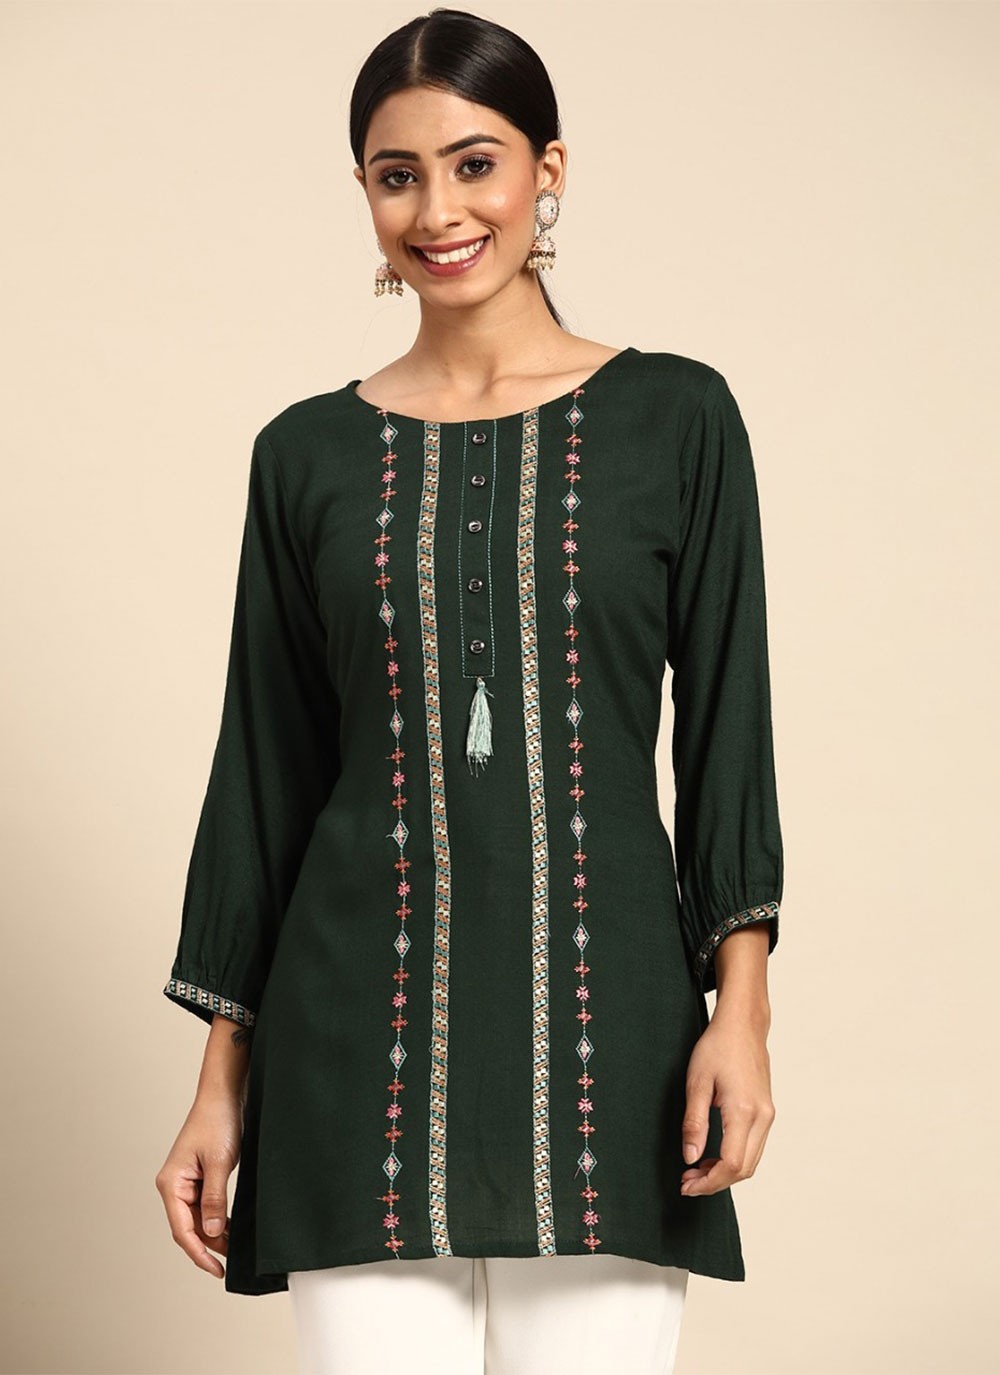 Green Rayon Embroidered Party Wear Kurti